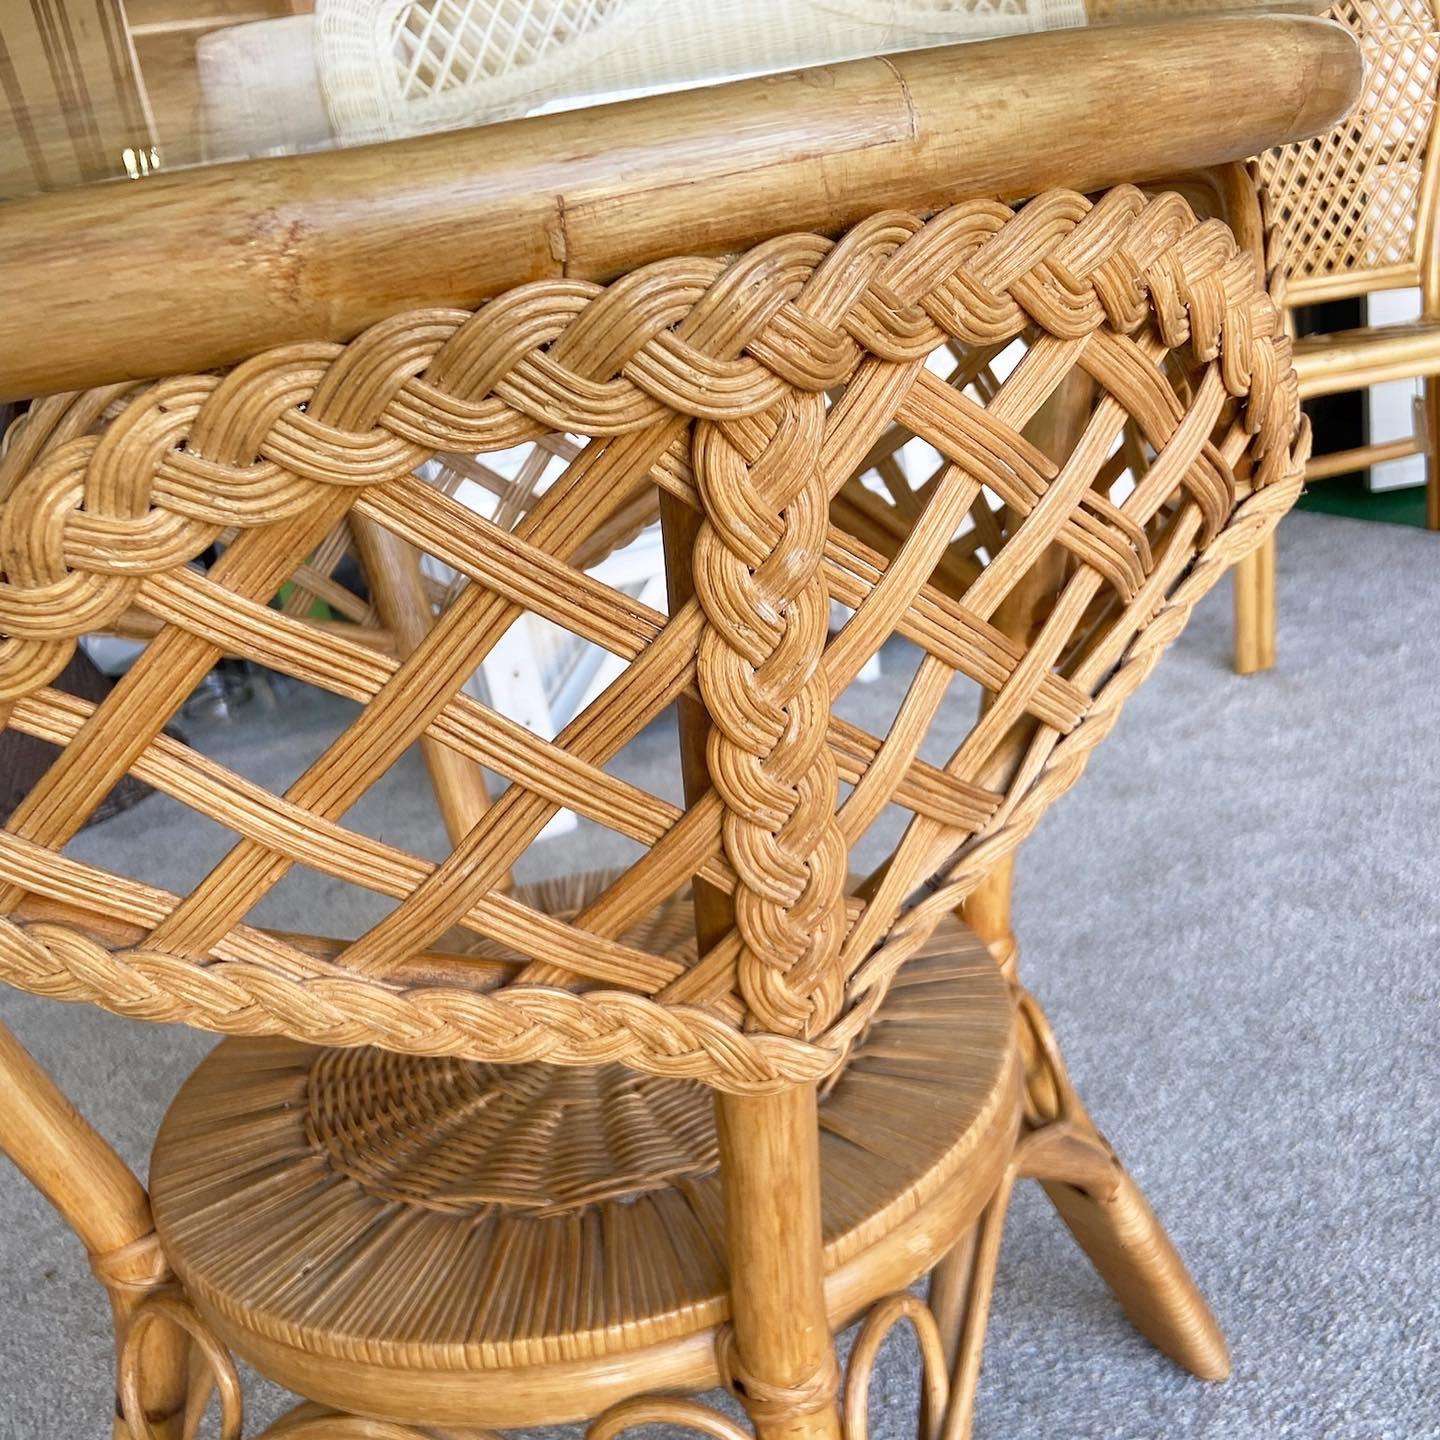 https://dolphinflamingo.com/wp-content/uploads/2022/11/1980s-boho-chic-rattan-and-woven-wicker-circular-glass-top-dining-table-8213.jpeg